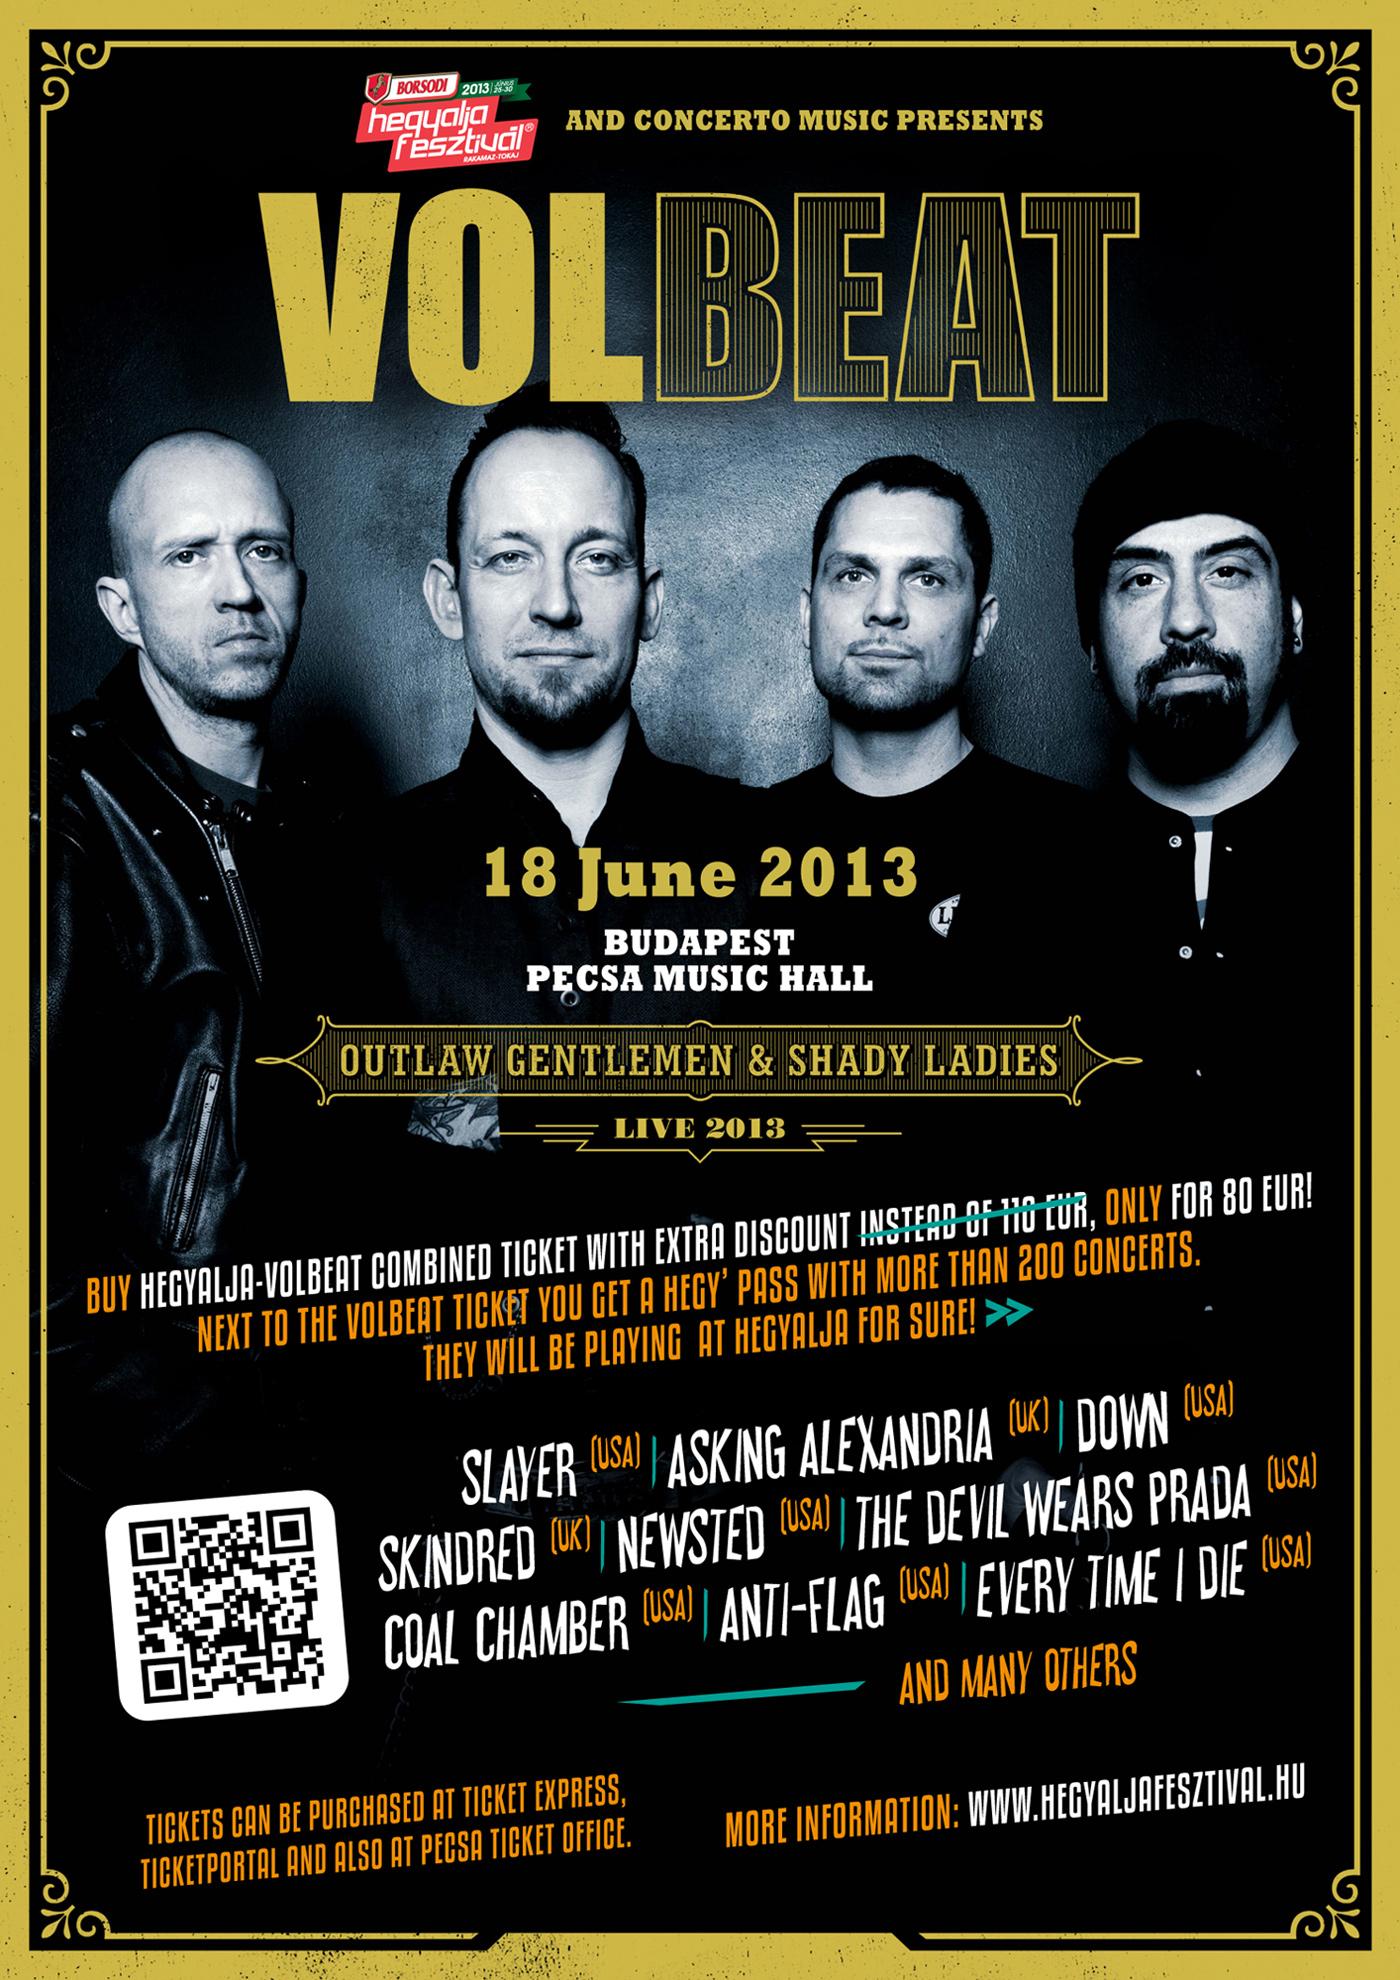 Volbeat & Hegyalja Festival Combined Tickets For 35 Euro Off